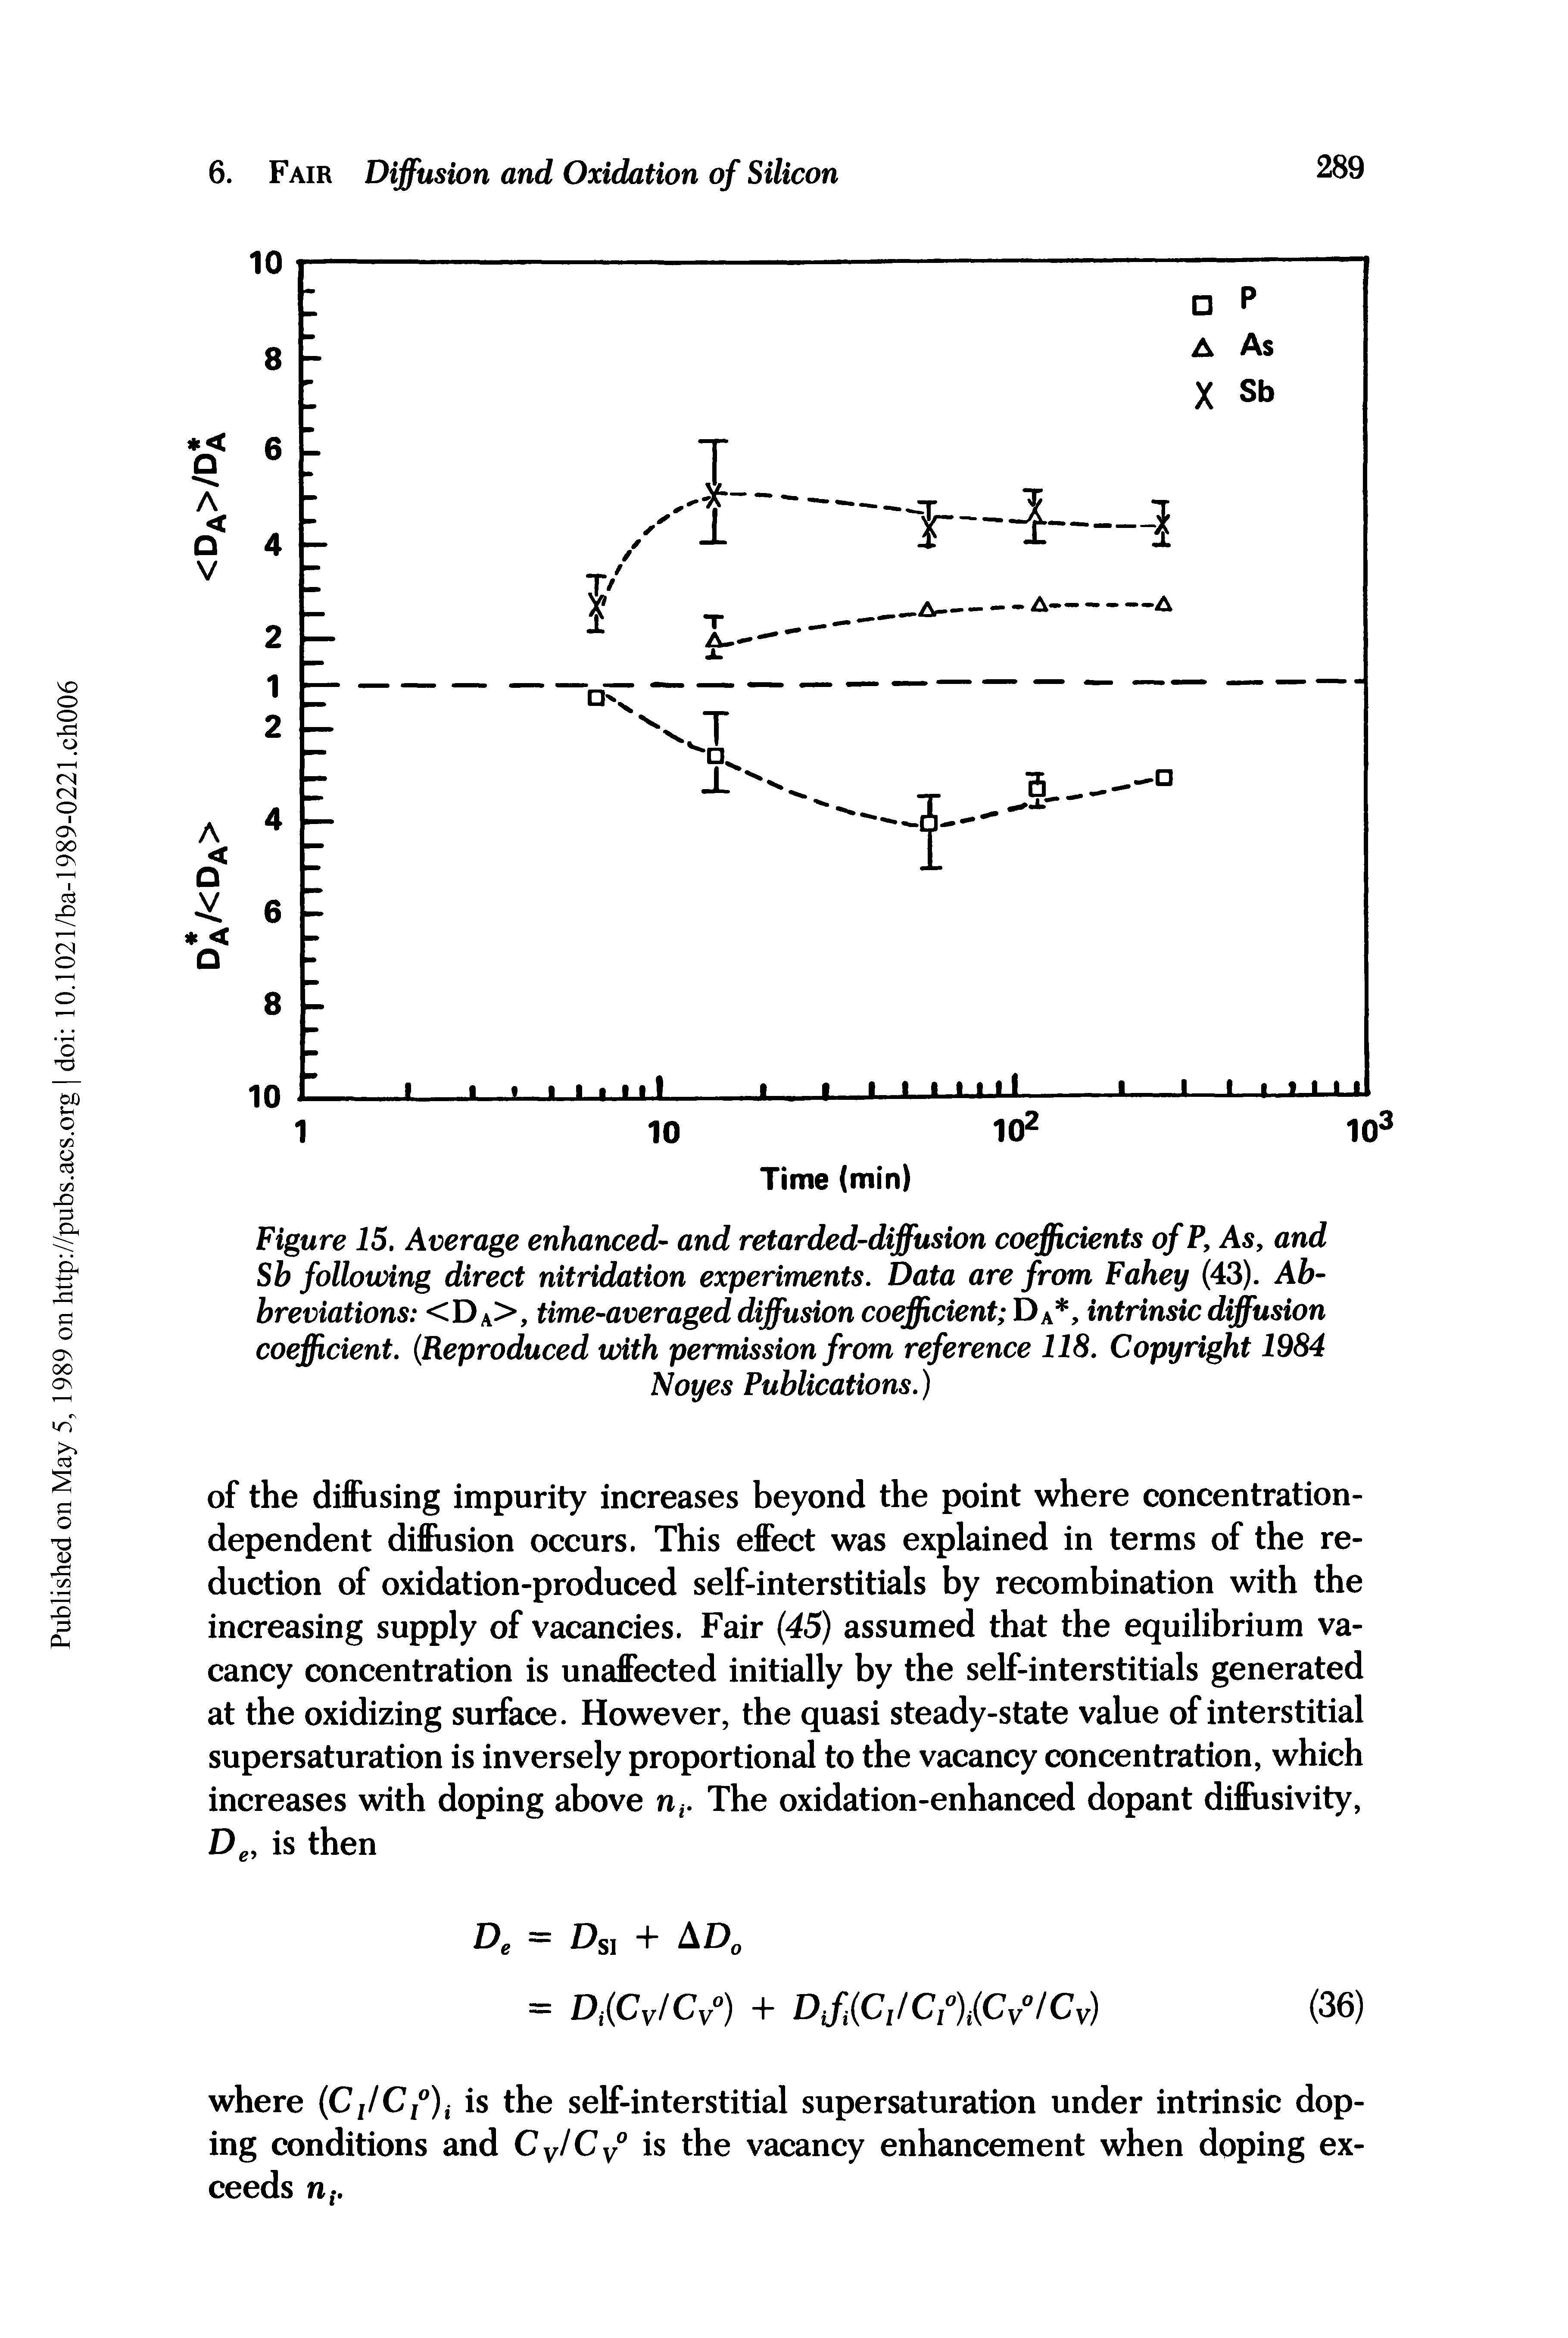 Figure 15. Average enhanced- and retarded-diffusion coefficients ofP9 As, and Sb following direct nitridation experiments. Data are from Fahey (43). Abbreviations <Da>, time-averaged diffusion coefficient ) a, intrinsic diffusion coefficient. (Reproduced with permission from reference 118. Copyright 1984...